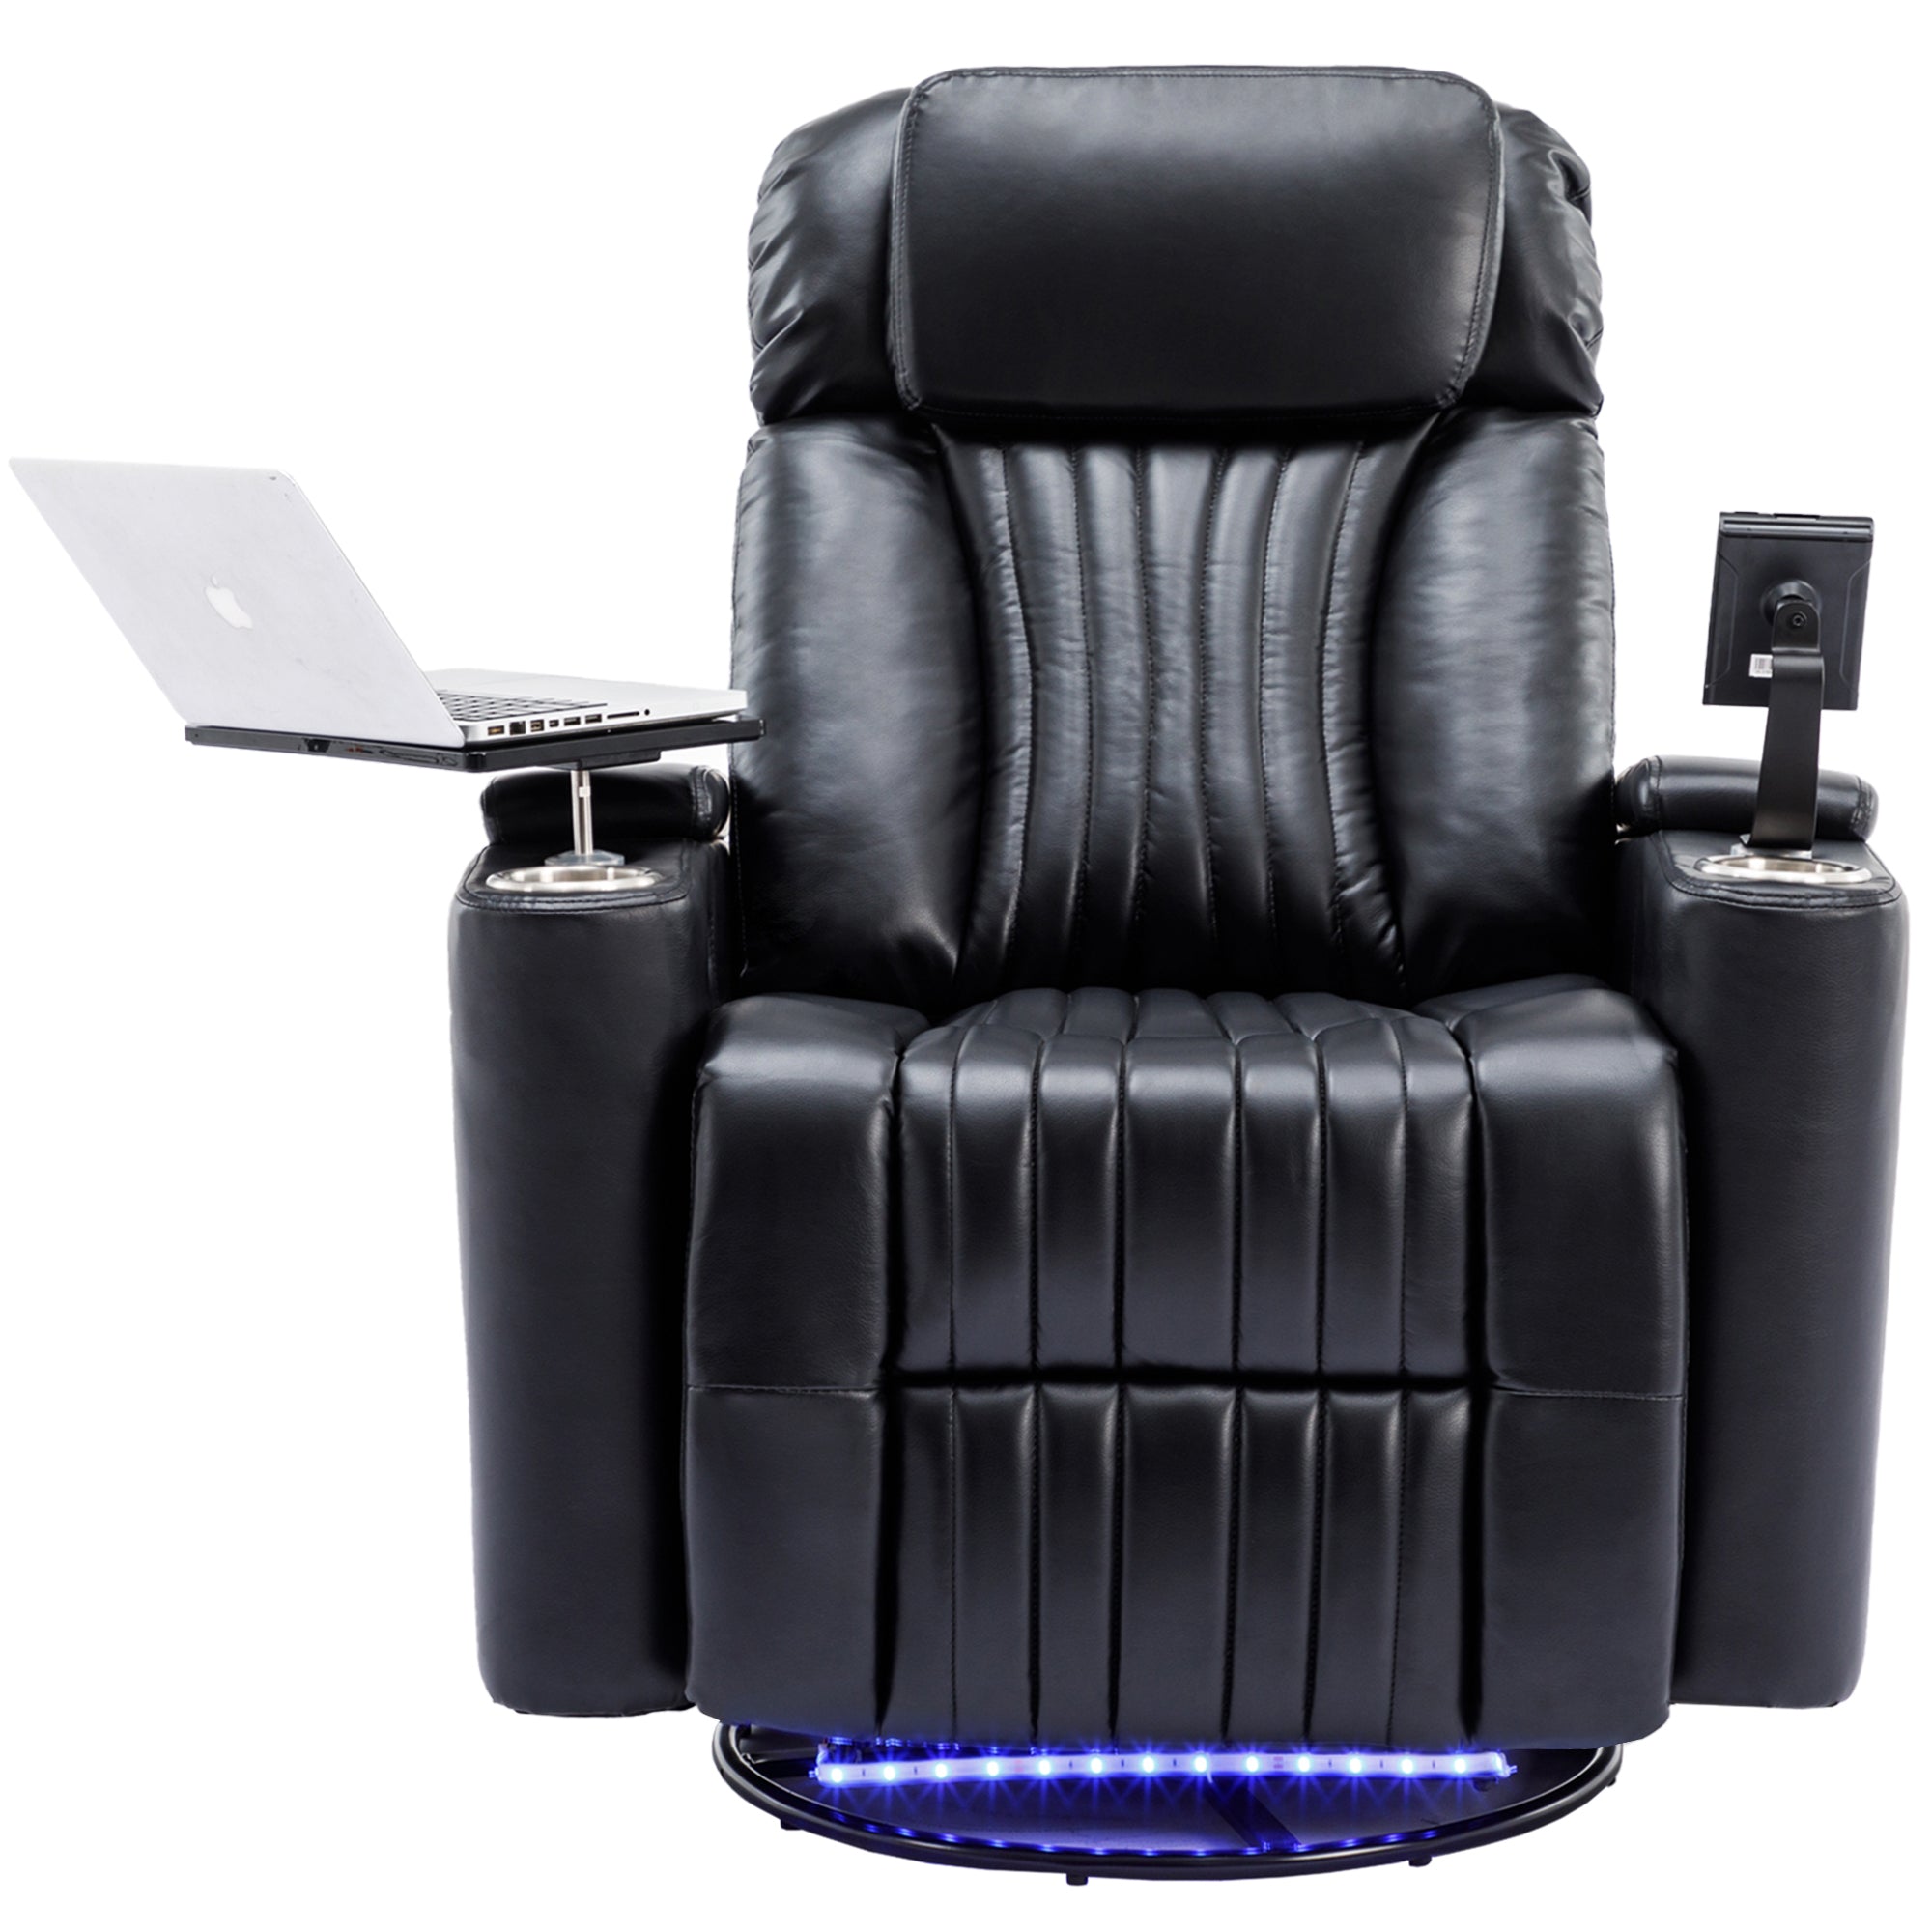 270° Power Swivel Recliner, Home Theater Seating with Hidden Arm Storage and LED Light Strip, Cup Holder, 360° Swivel Tray Table, Cell Phone Holder, Black